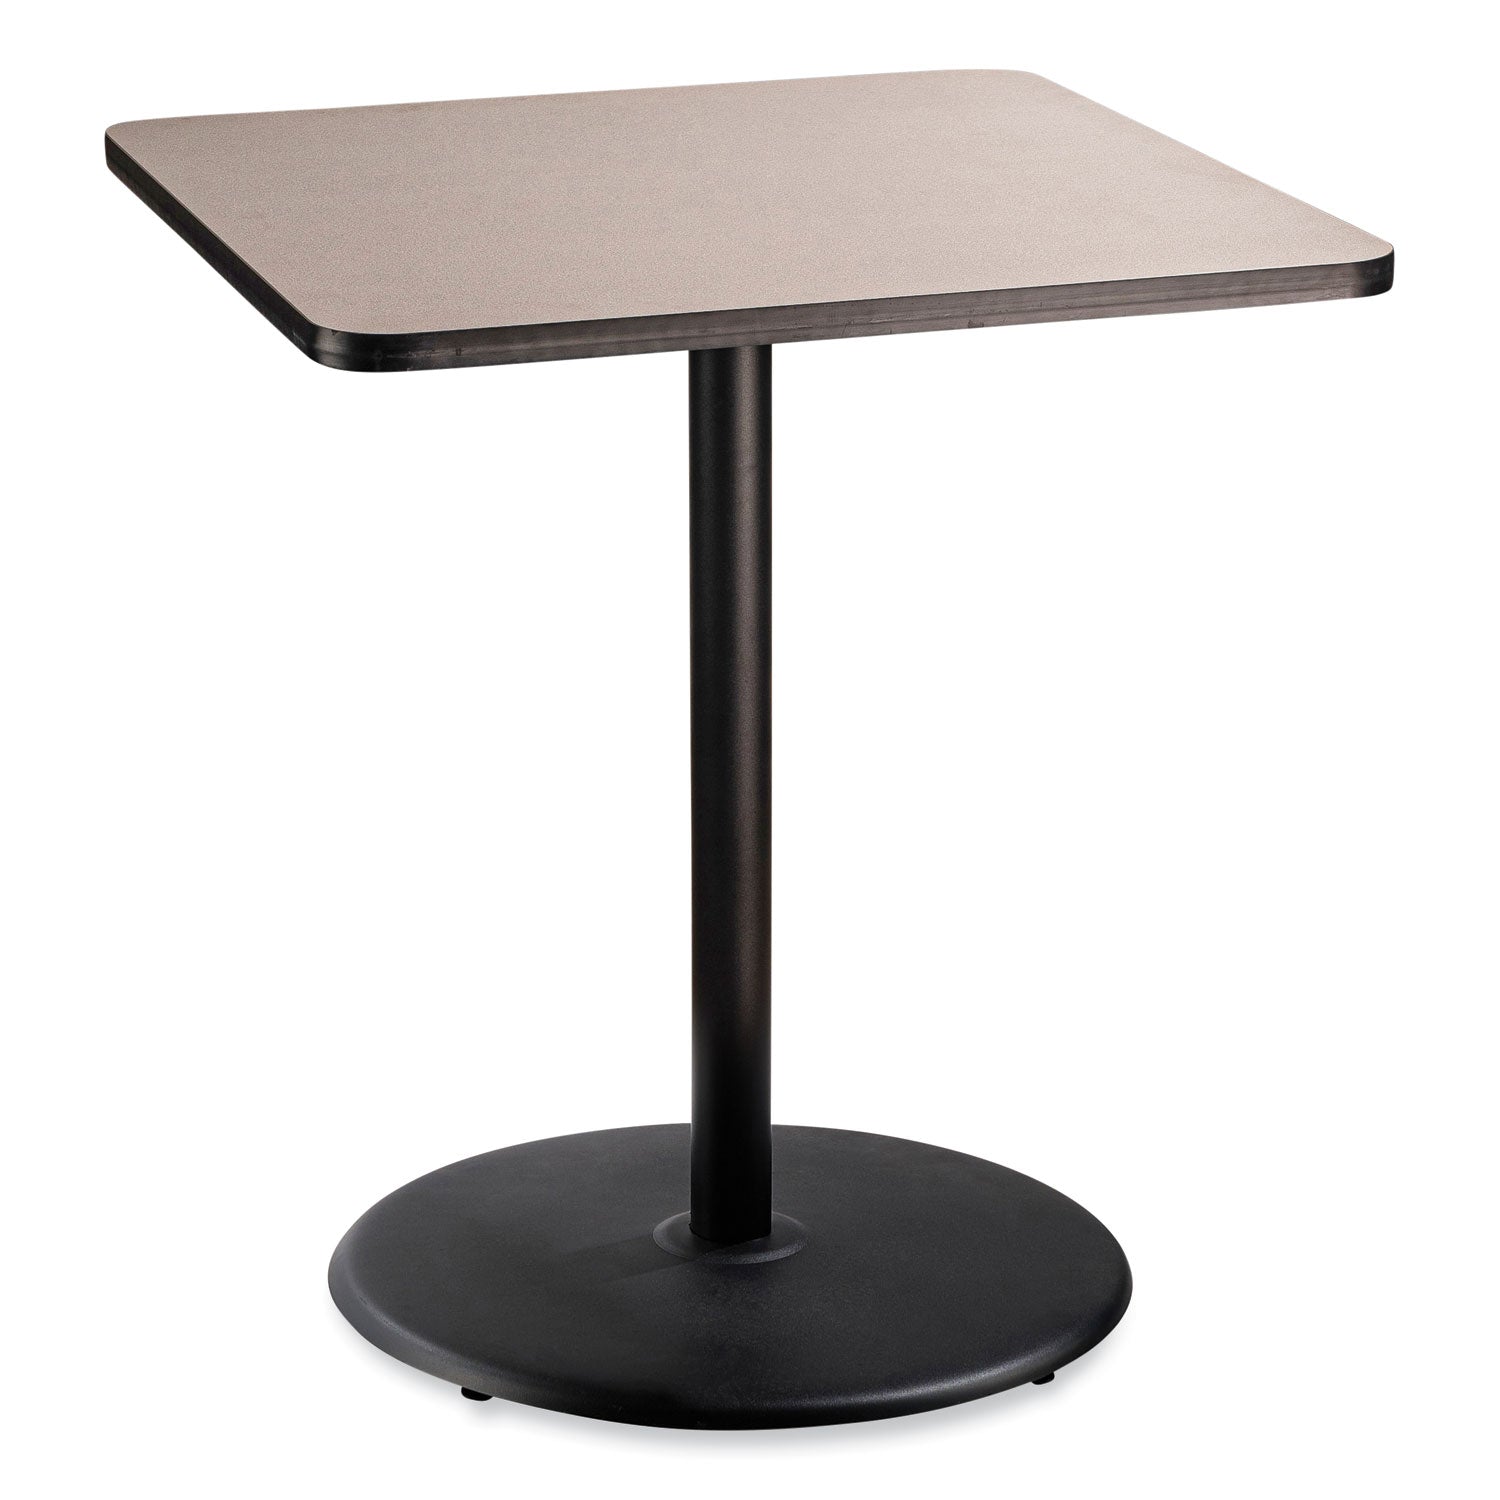 cafe-table-36w-x-36d-x-42h-square-top-round-base-gray-nebula-top-black-base-ships-in-7-10-business-days_npsct33636rb1gy - 1